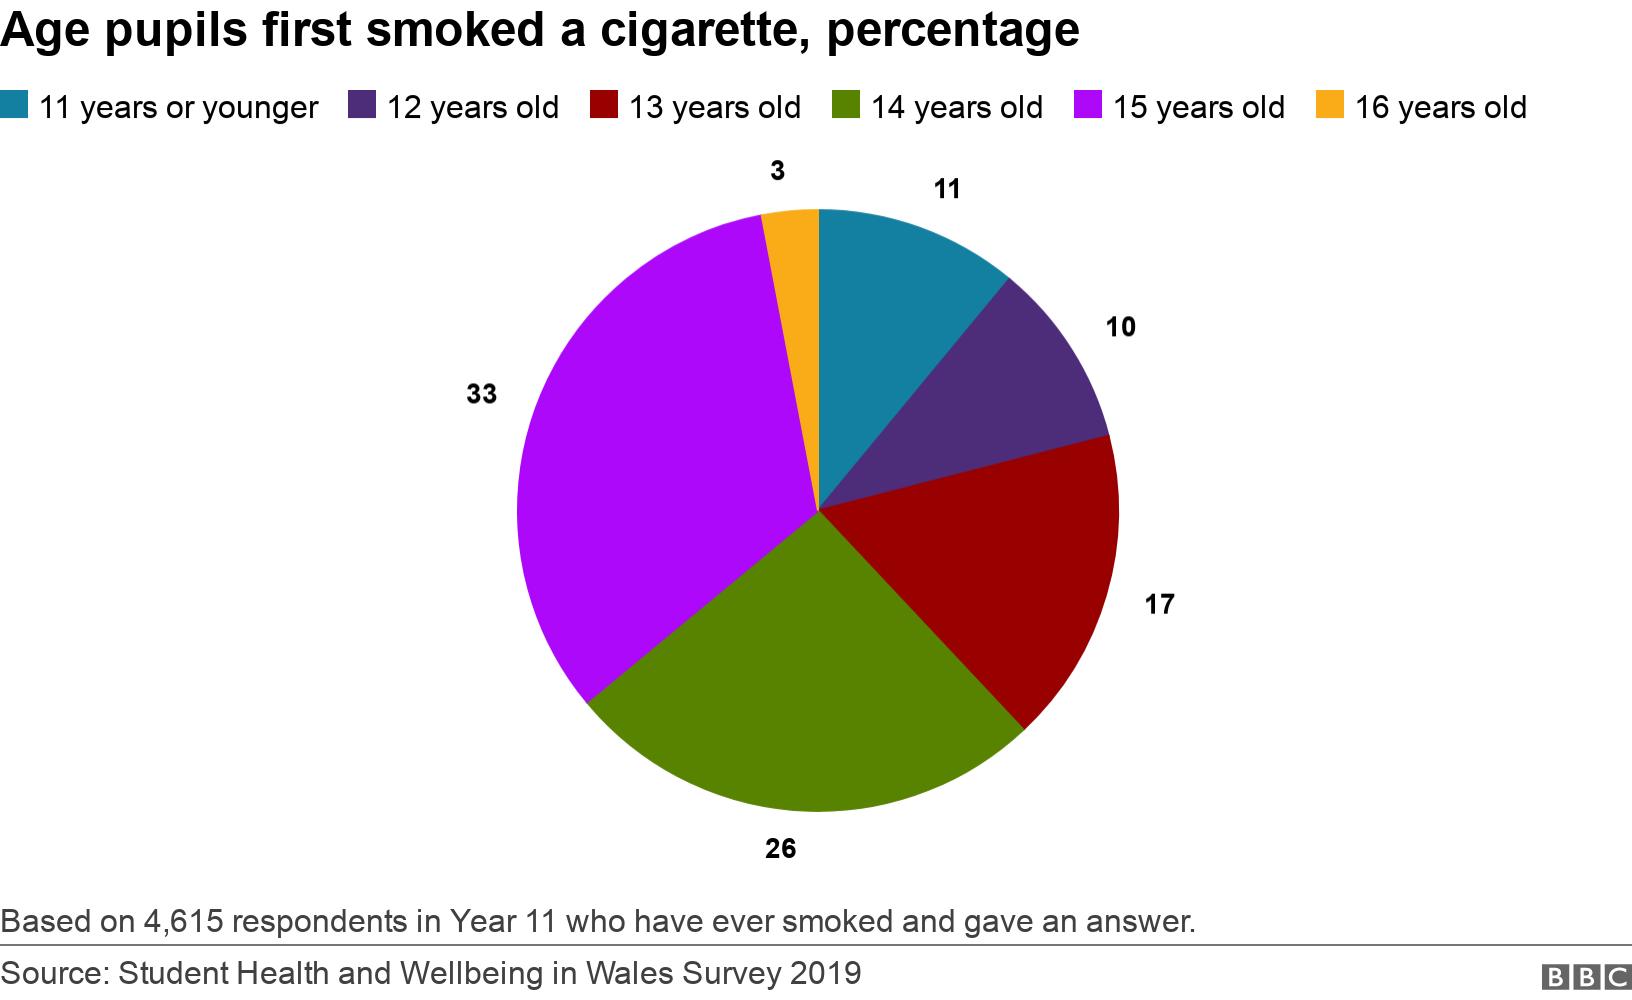 Age pupils first smoked a cigarette, percentage. . A pie chart showing the age 4,615 pupils in Wales first smoked a cigarette Based on 4,615 respondents in Year 11 who have ever smoked and gave an answer. .